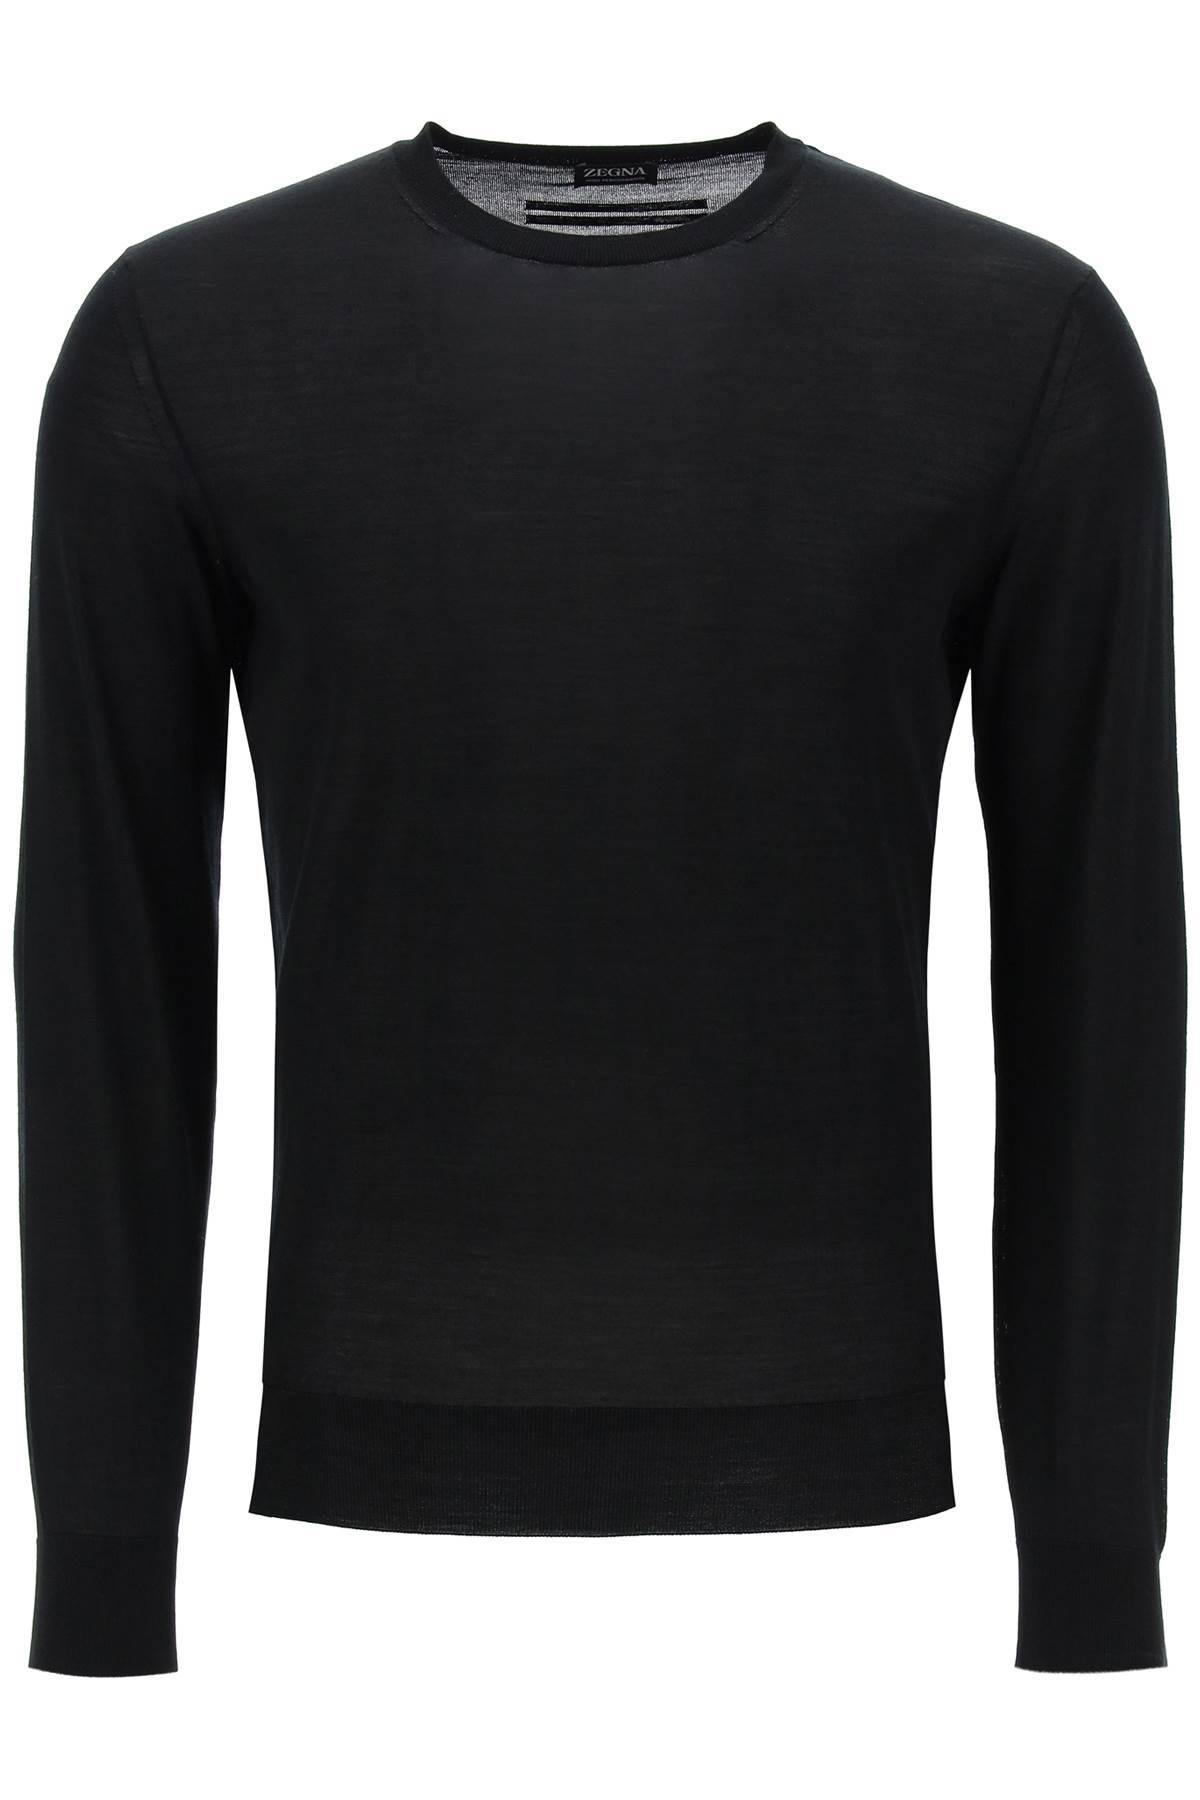 zegna ZEGNA crew-neck sweater in pure wool